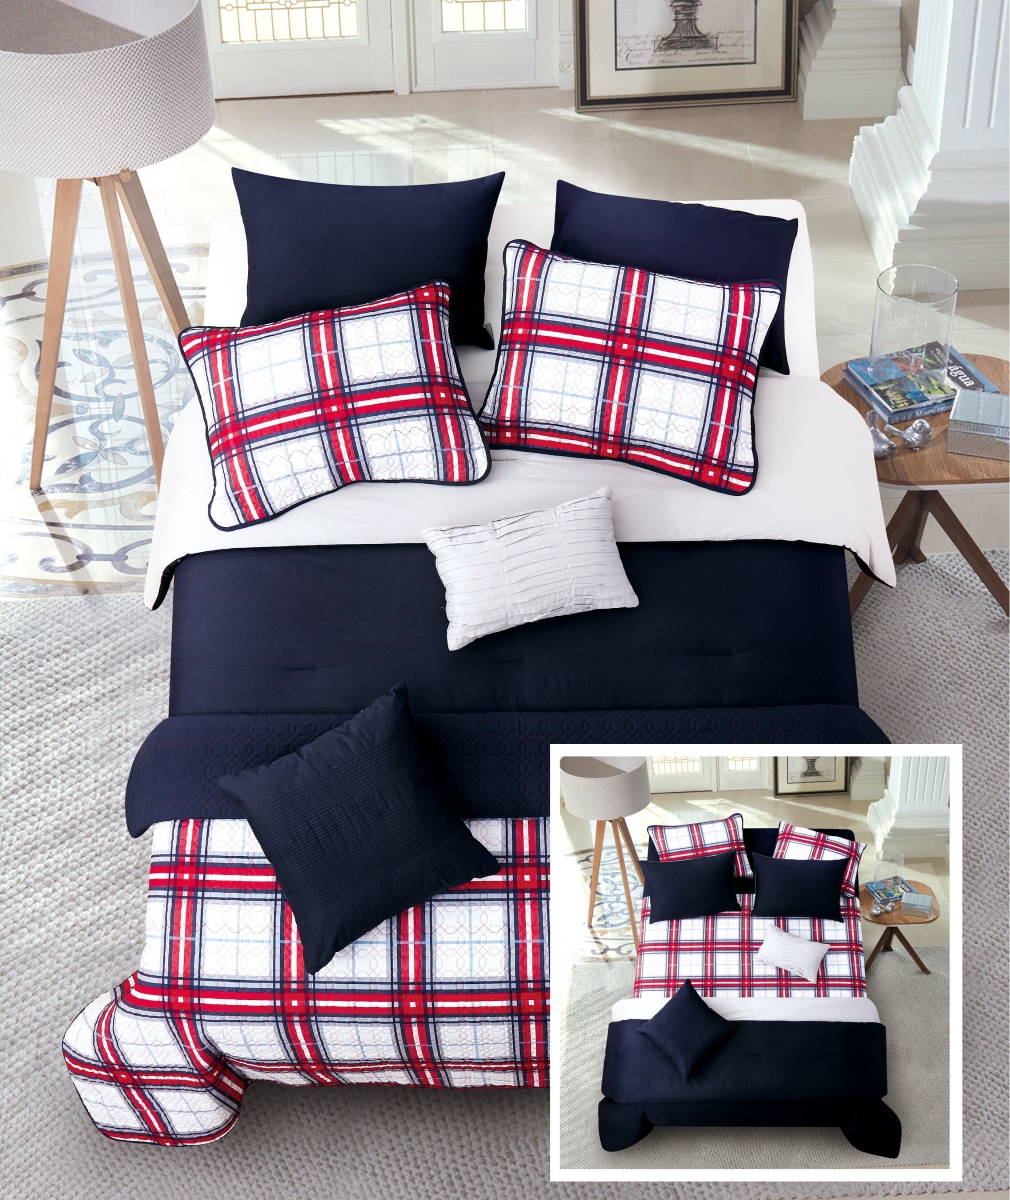 80336 Red Plaid Layered Comforter & Coverlet Set, Navy & Gray - Twin Size - 6 Piece